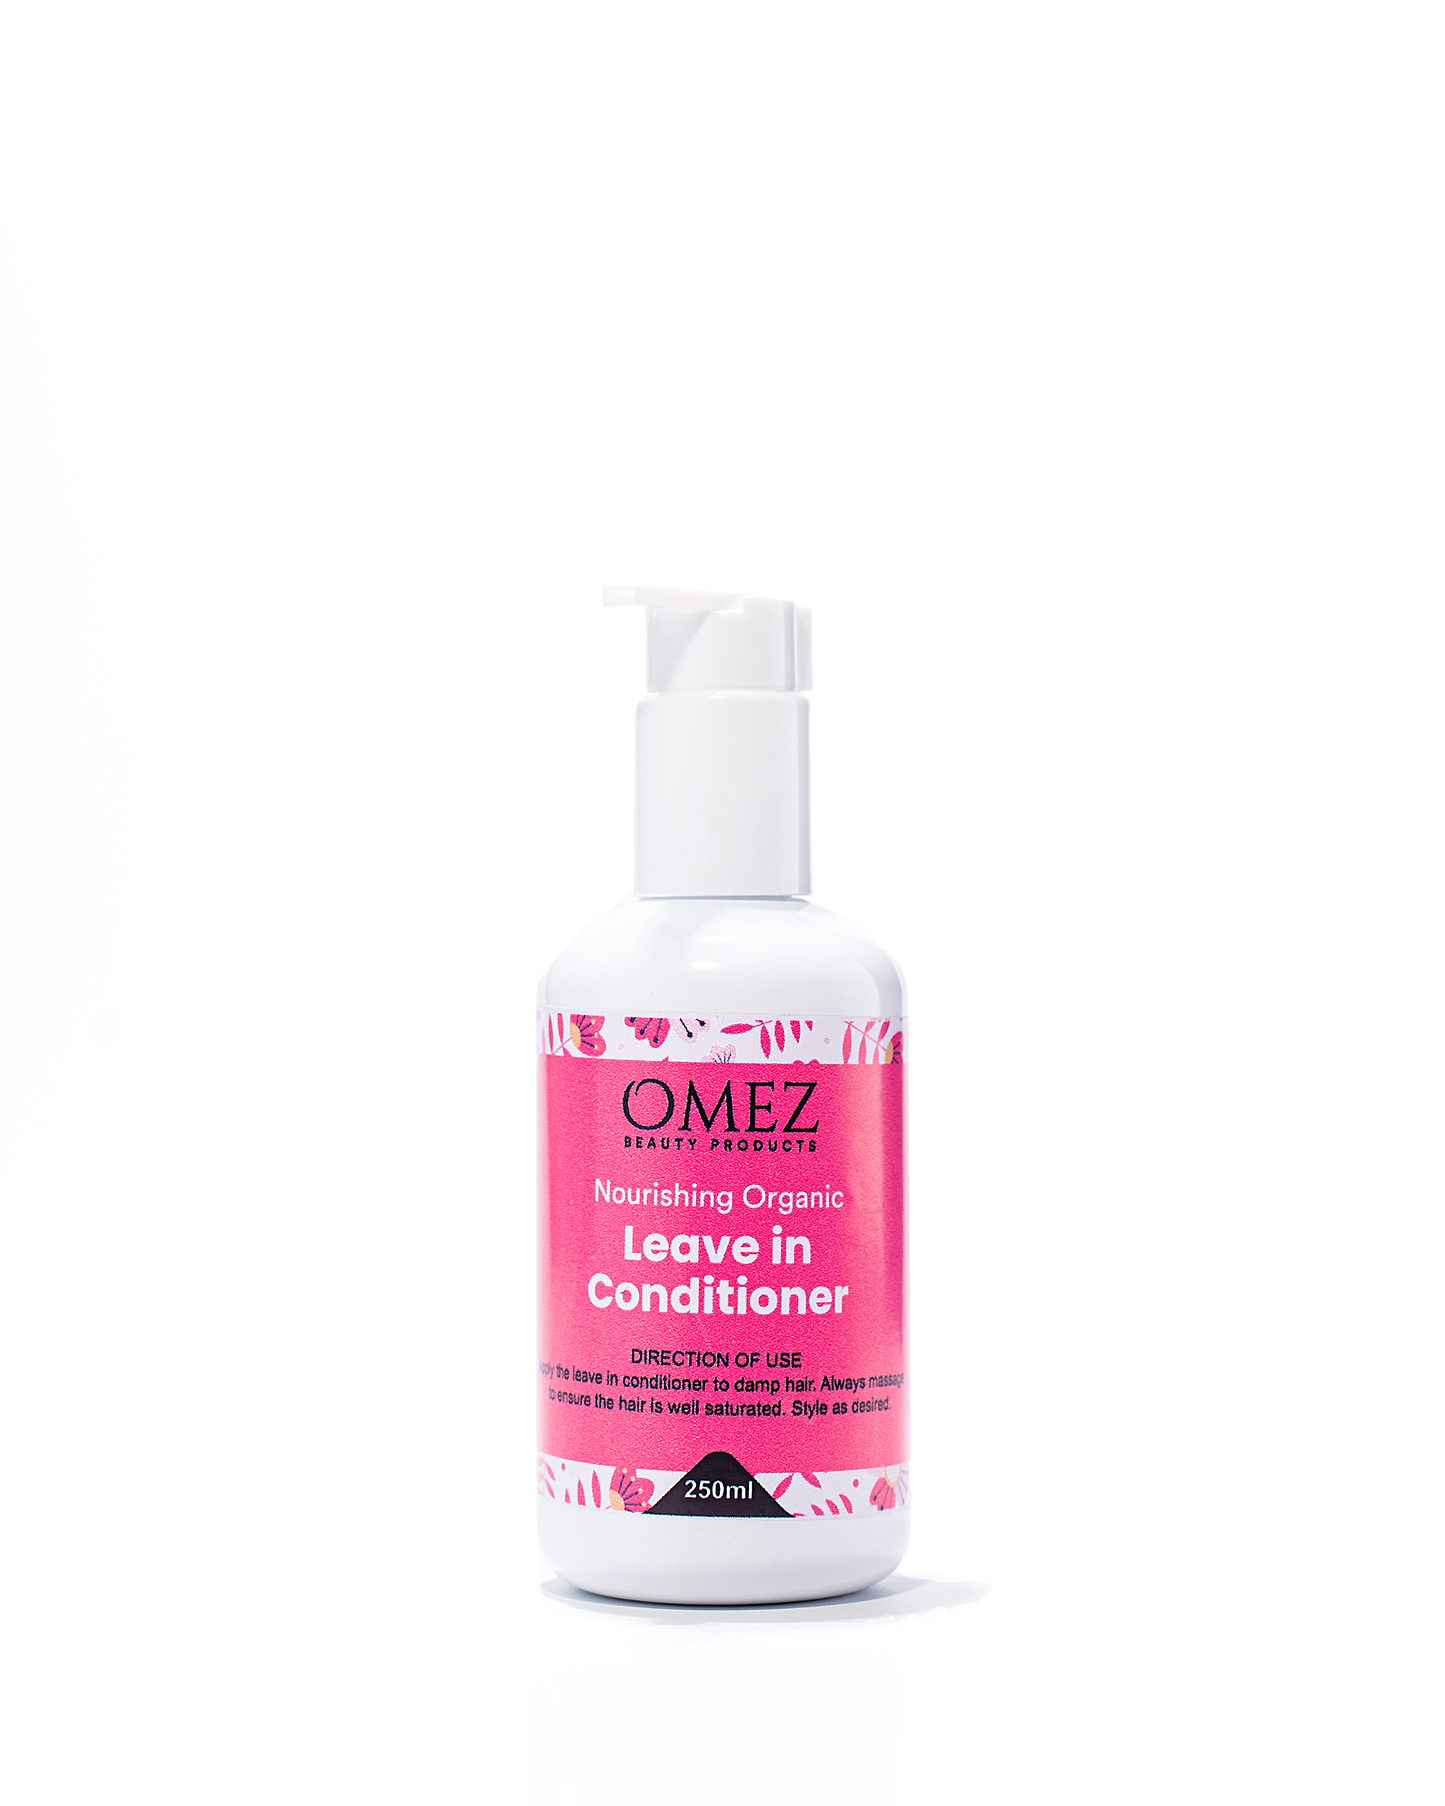 Omez Nourishing leave in conditioner - - Omez Beauty Products 